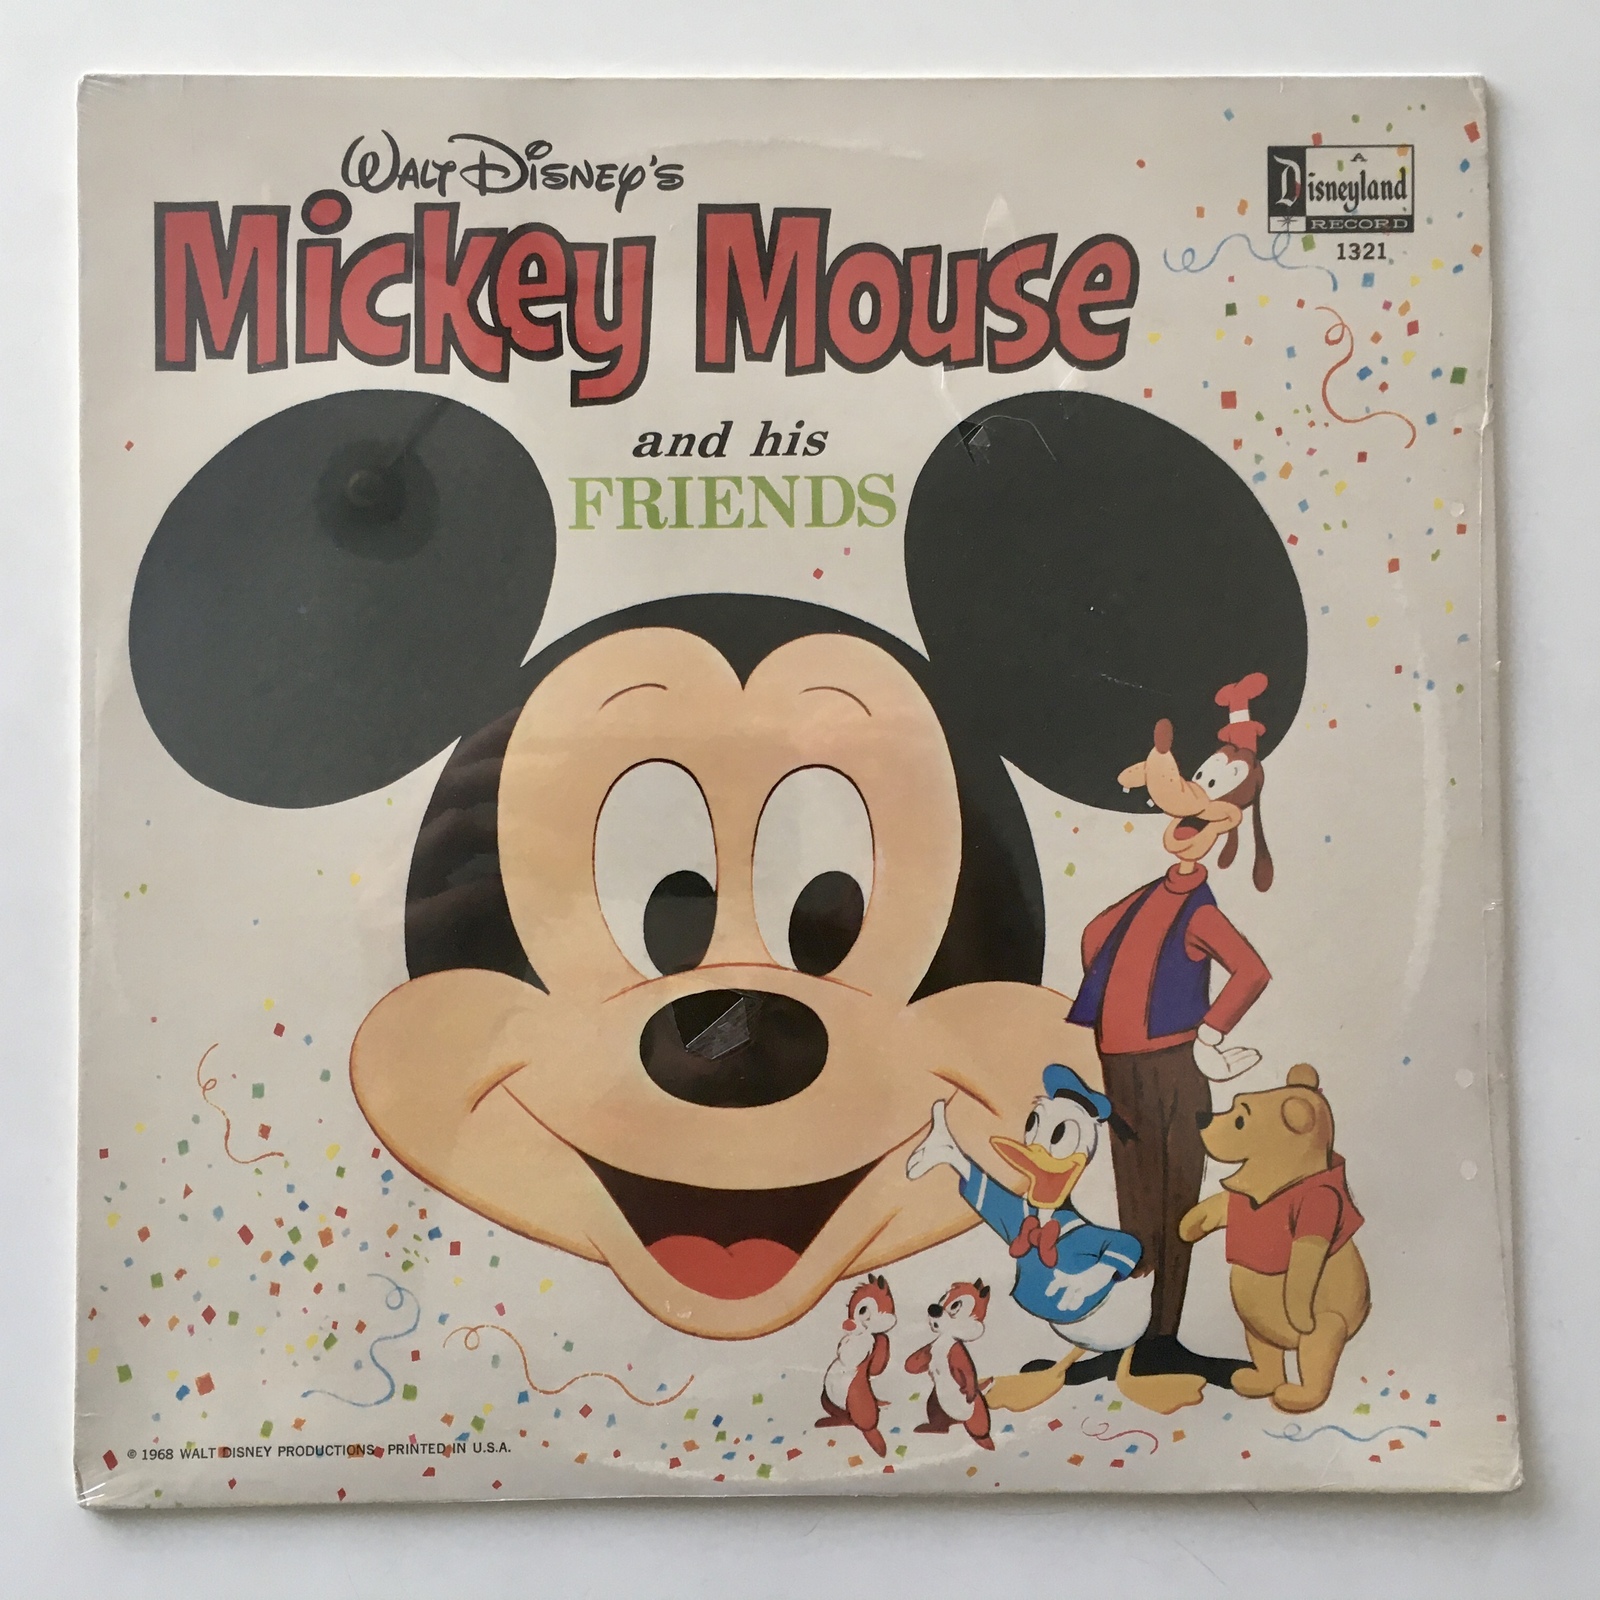 Primary image for Mickey Mouse and His Friends SEALED LP Vinyl Record Album